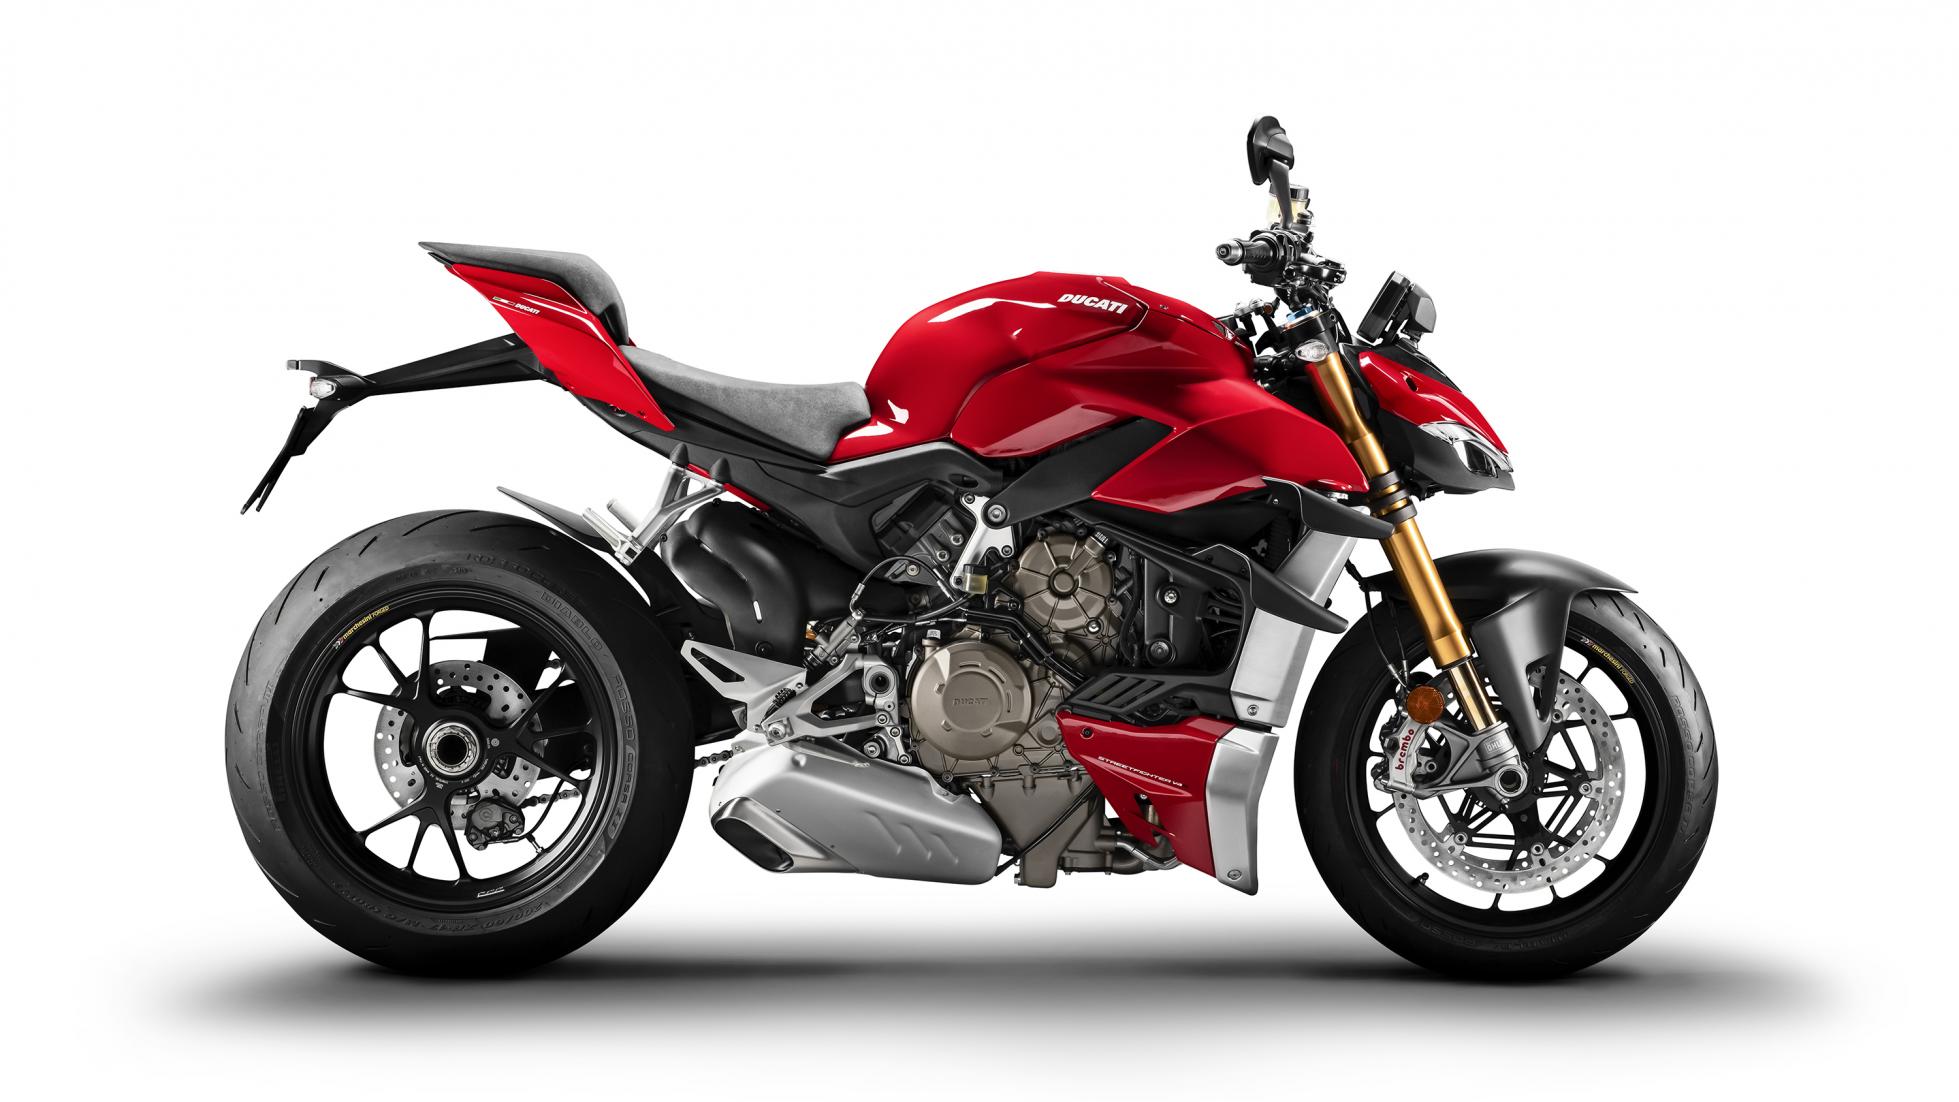 These motorbikes will kill a supercar for under £20k (approx. RM108,000)